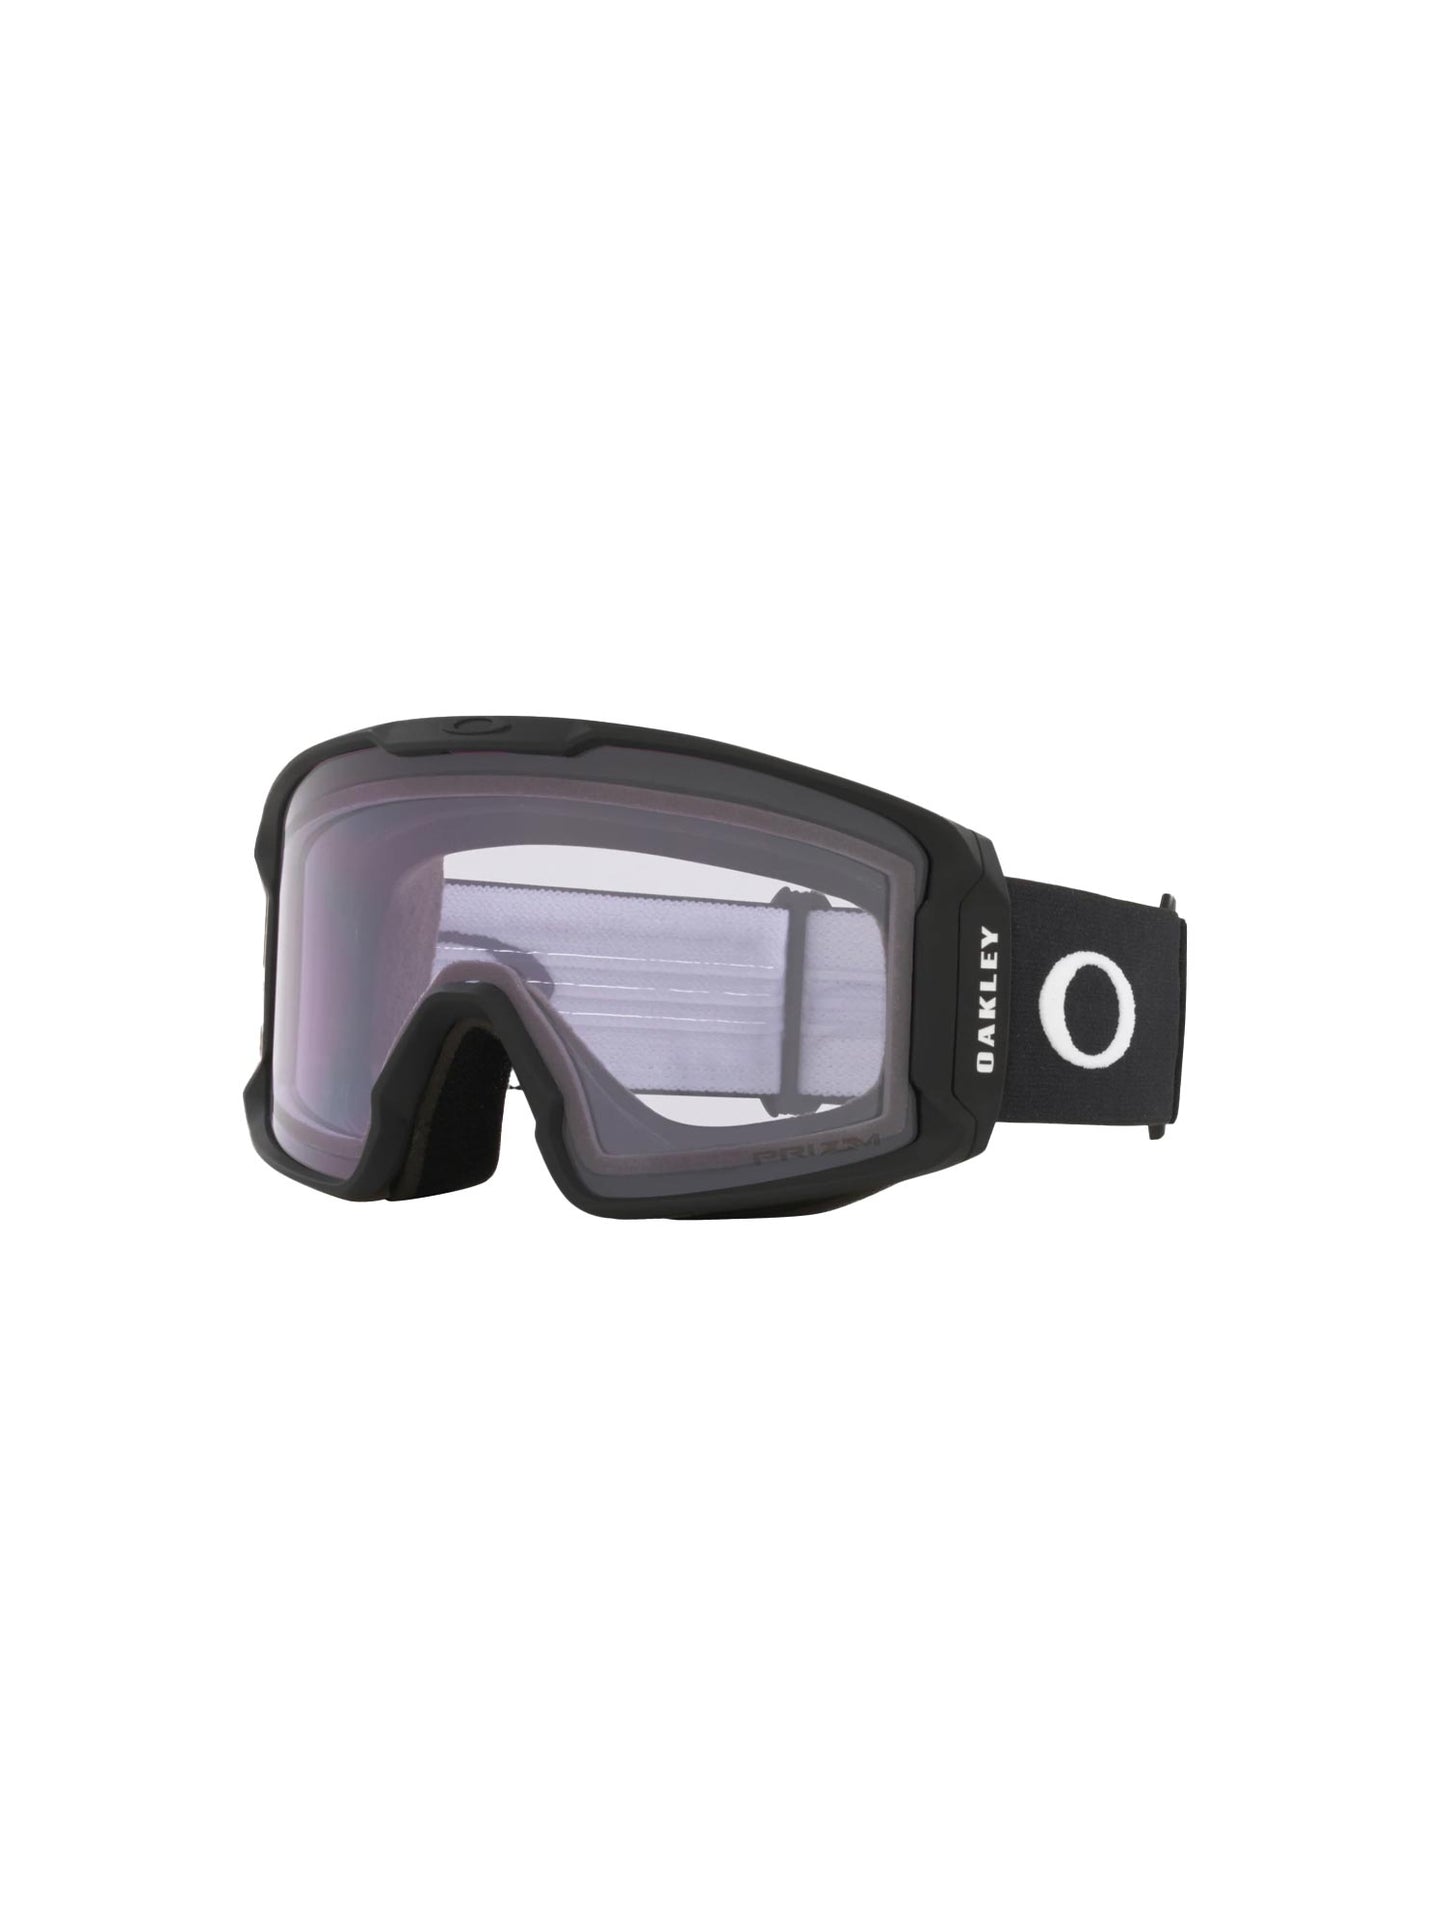 Oakley Line Miner L snow goggle with black strap and clear lens